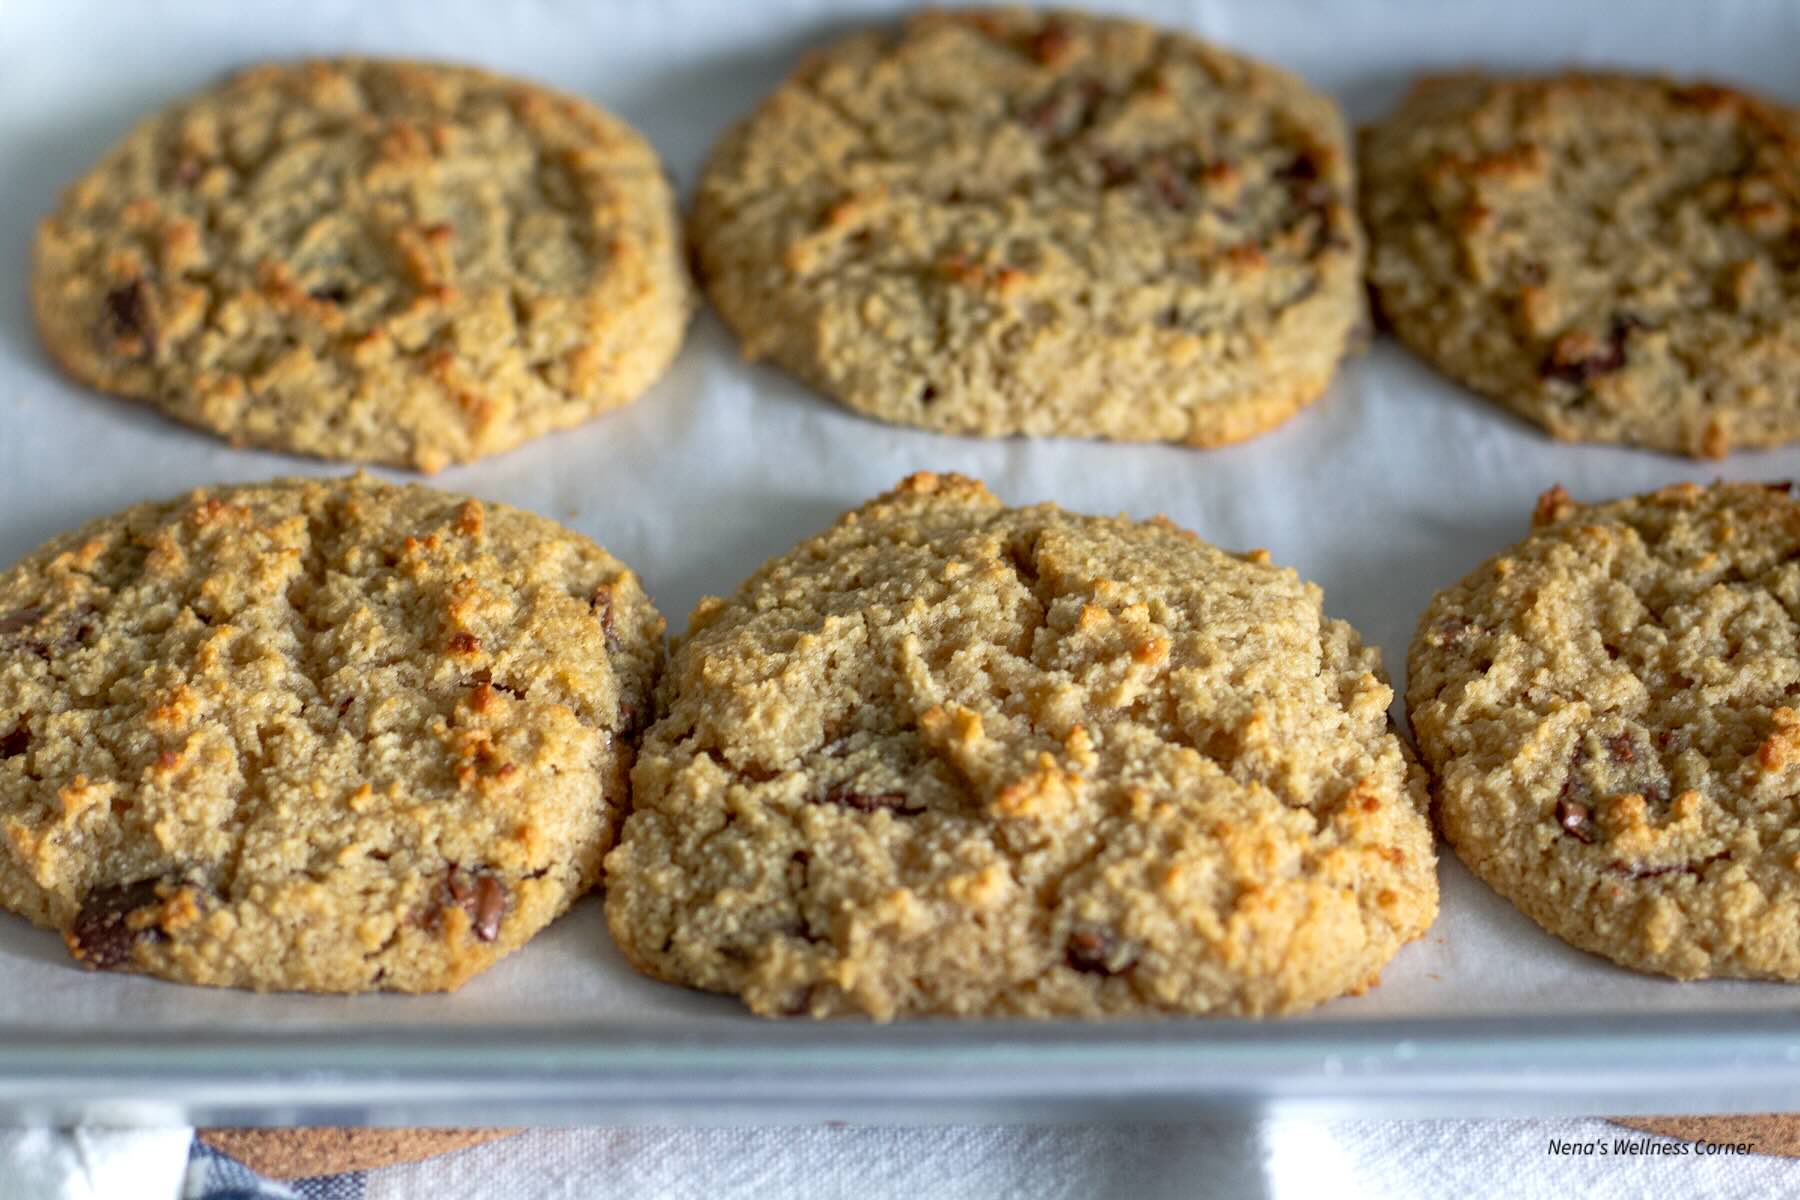 Gluten-free Chocolate Chip Cookies made with Almond Flour placed on a Baking Cookie Sheet